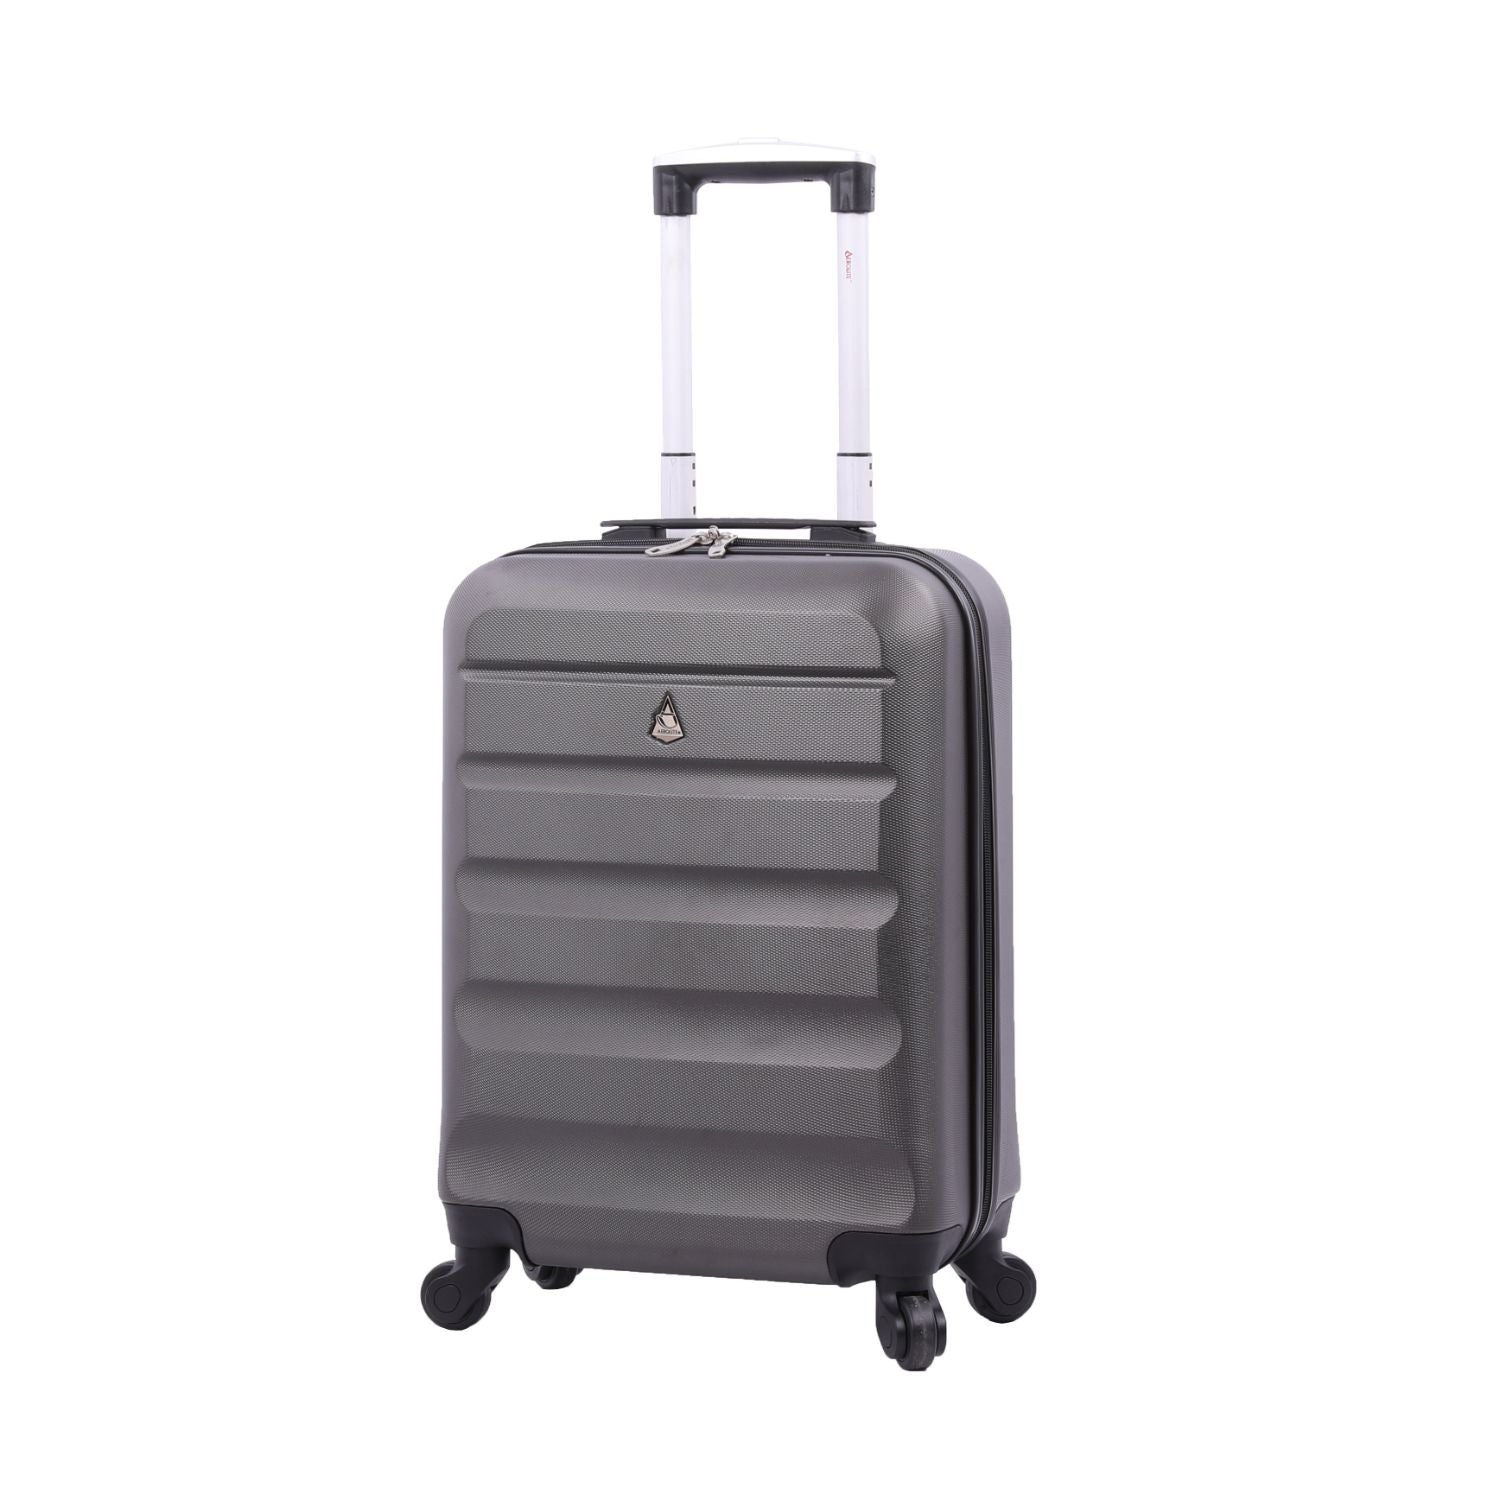 Aerolite 55x38x20cm Emirates Max Size Hard Shell Carry On Hand Cabin Luggage Suitcase 55x38x20 with 4 Wheels,Also Fits Many Other Airlines